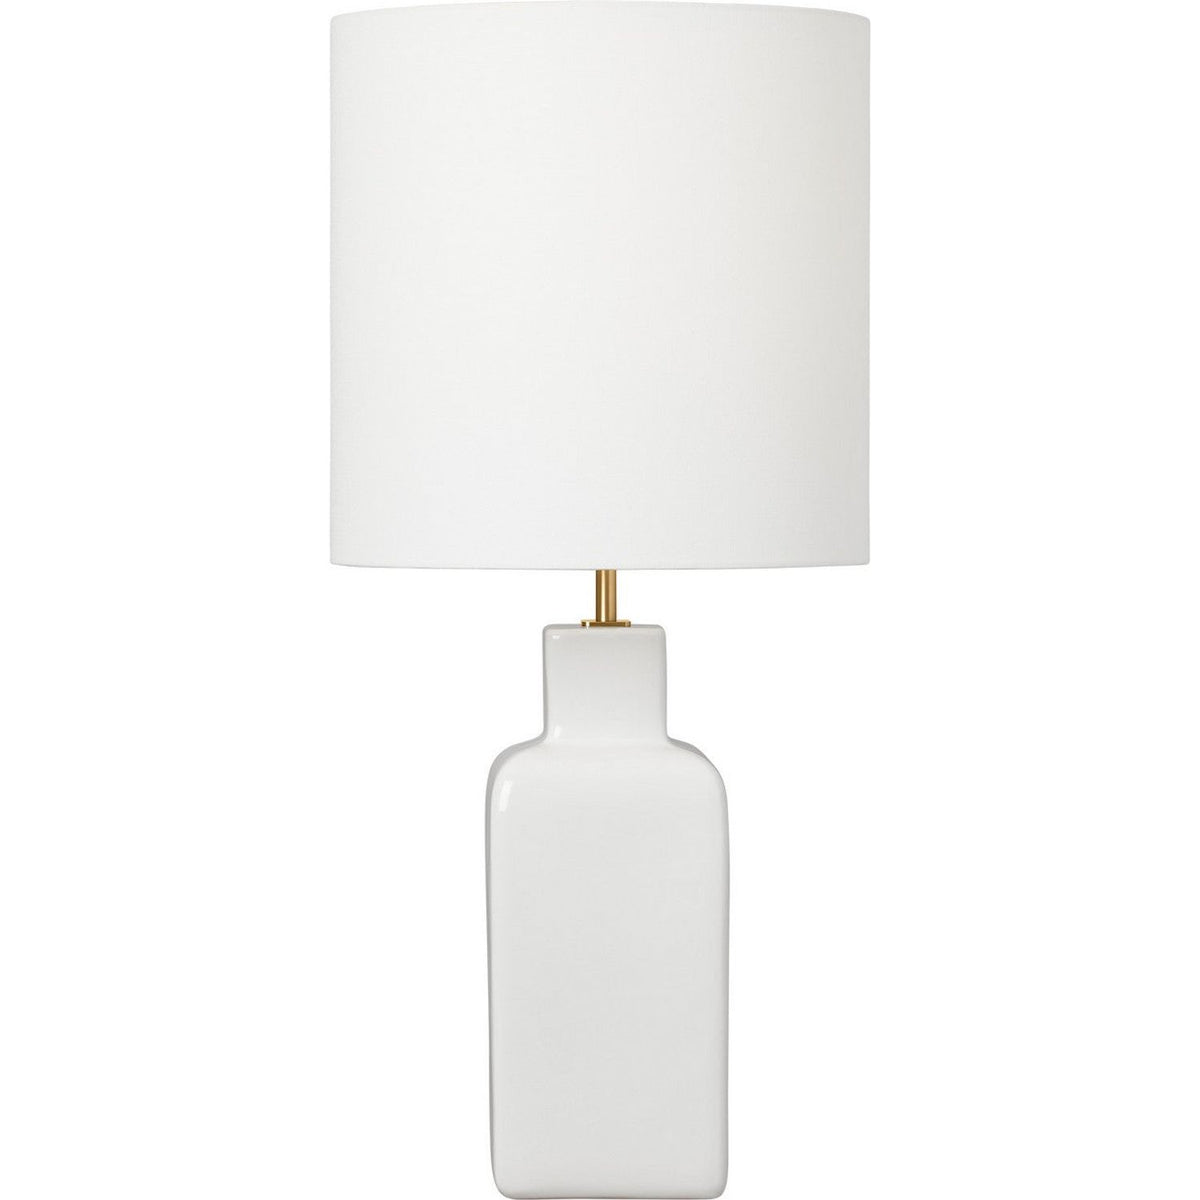 Visual Comfort Studio Canada - KST1171NWH1 - One Light Table Lamp - Anderson - New White